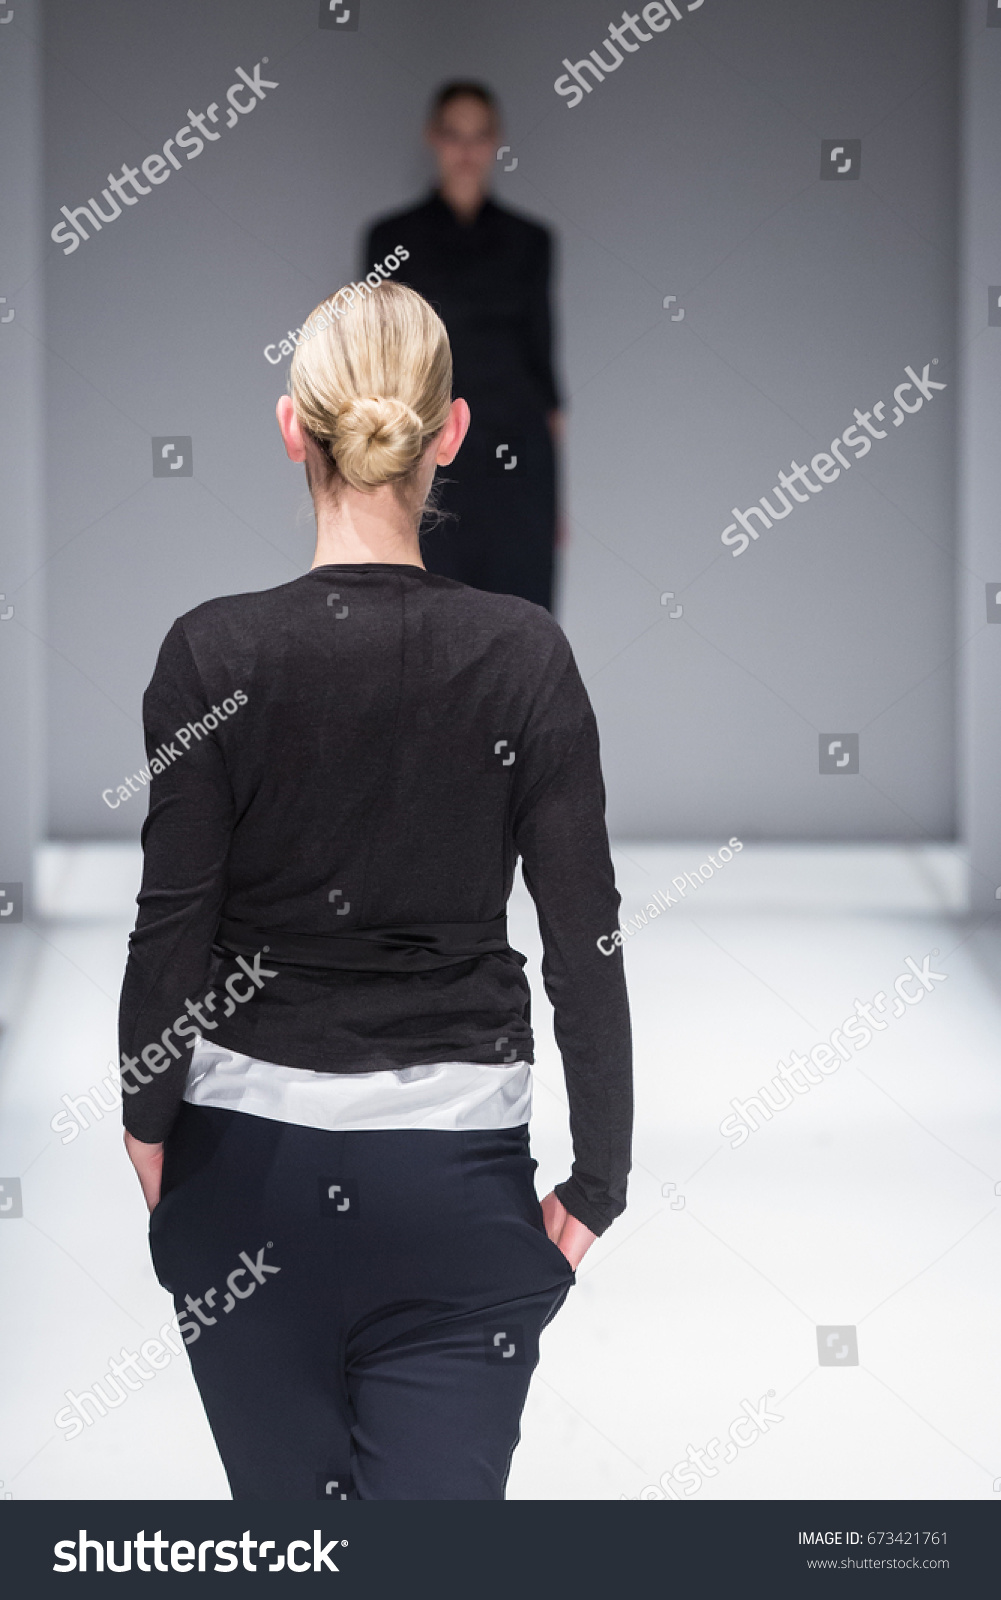 Fashion Show, Catwalk, Runway Event themed photo #673421761